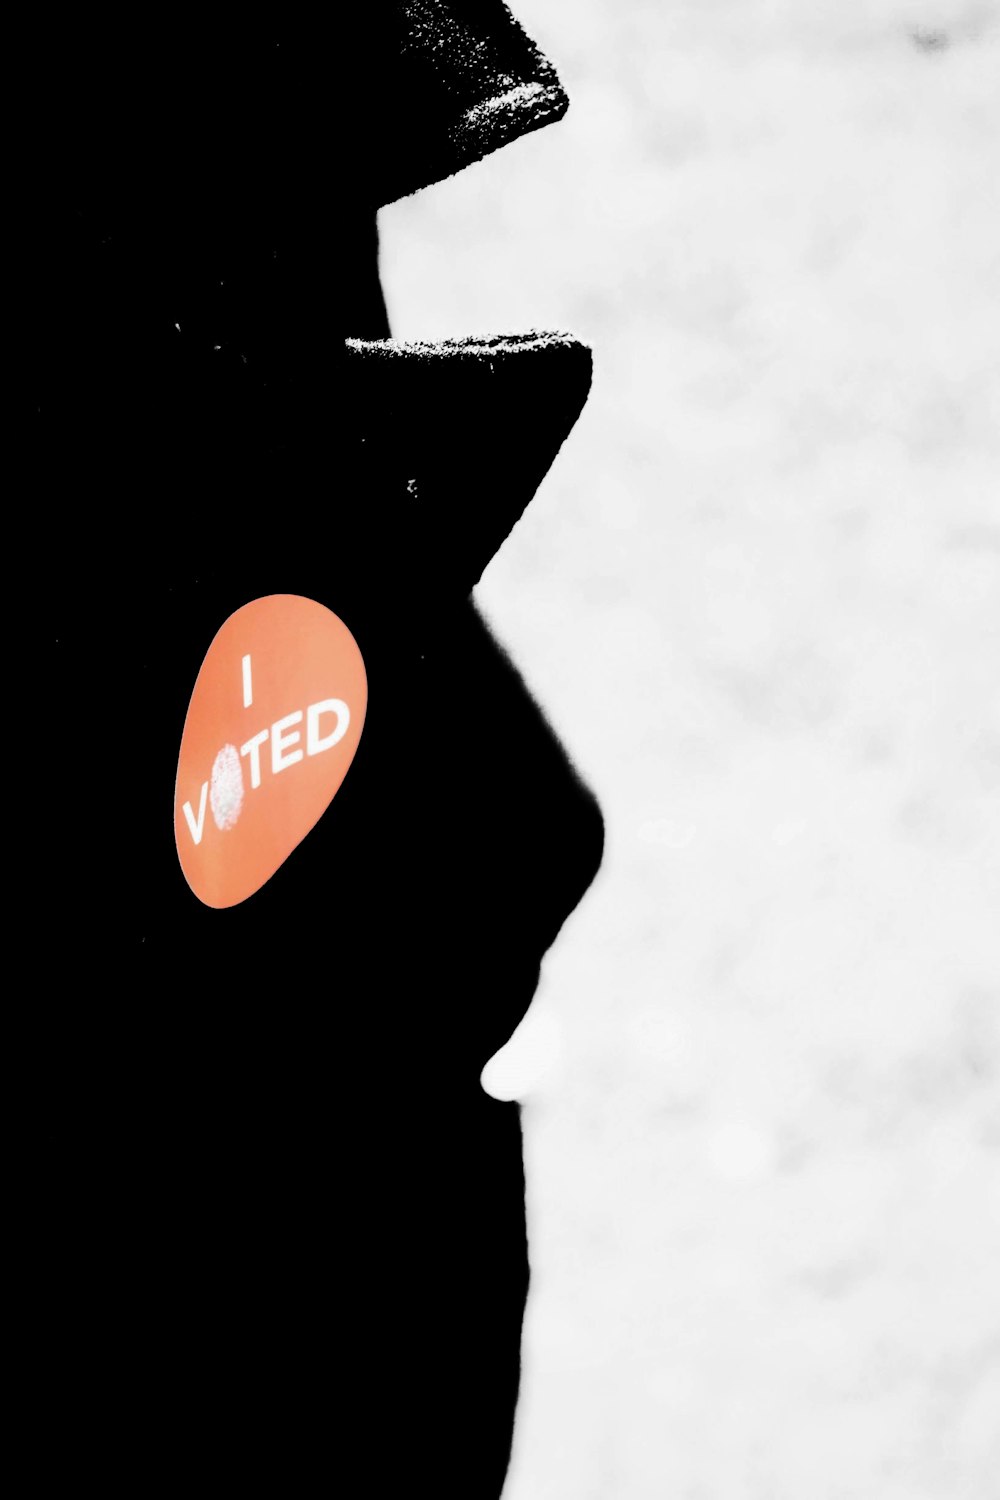 a close up of a person's face with a sticker on it